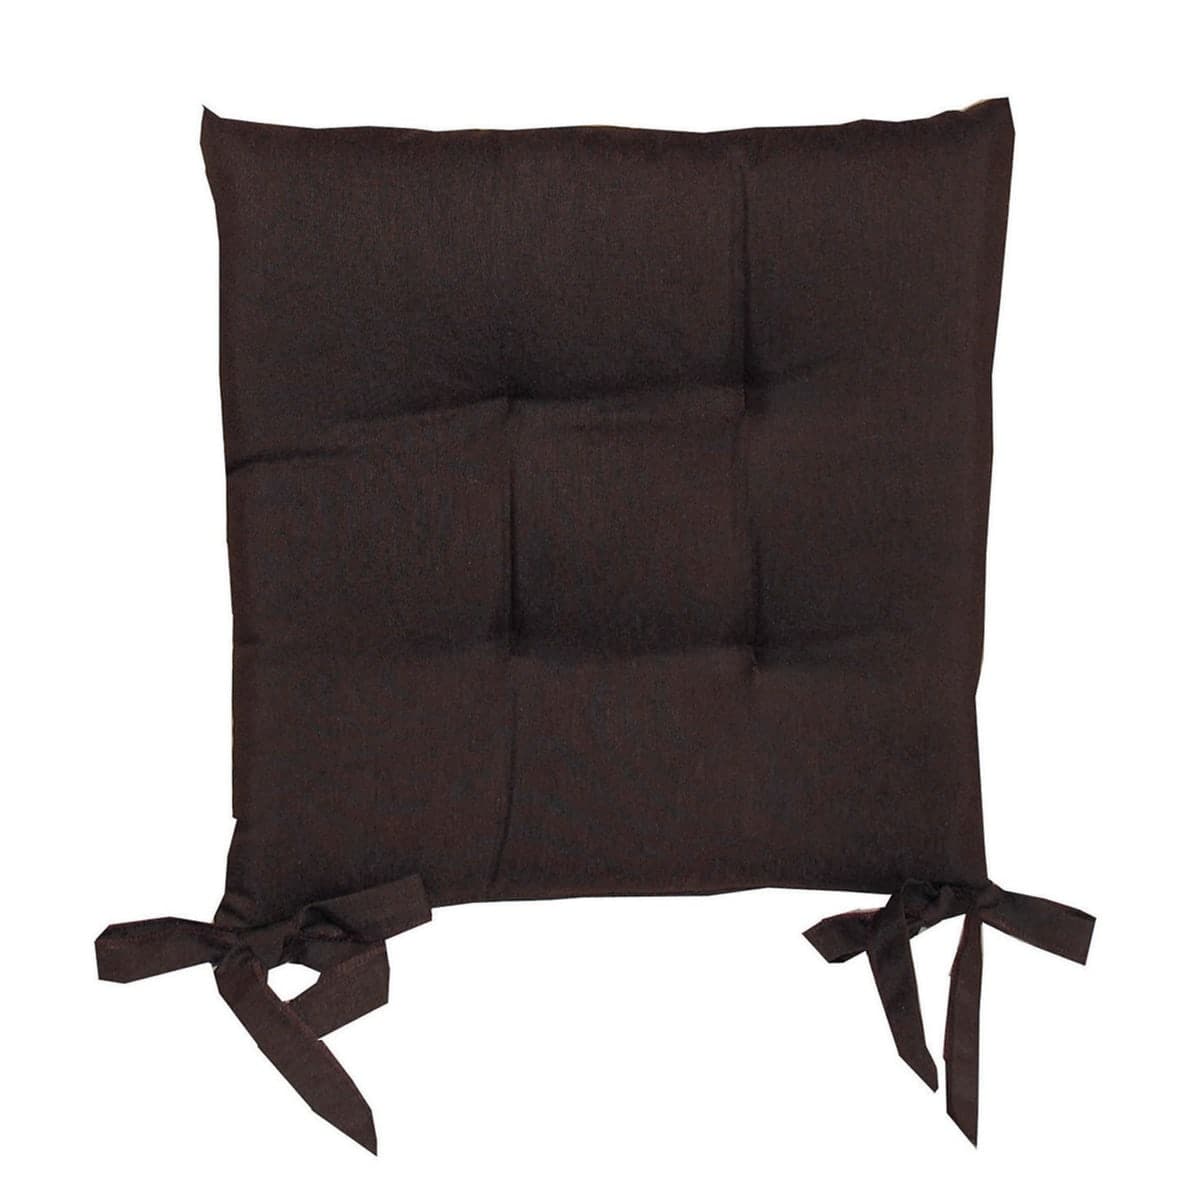 RELAX CHAIR COVER BROWN 40X40 CM - best price from Maltashopper.com BR480221651